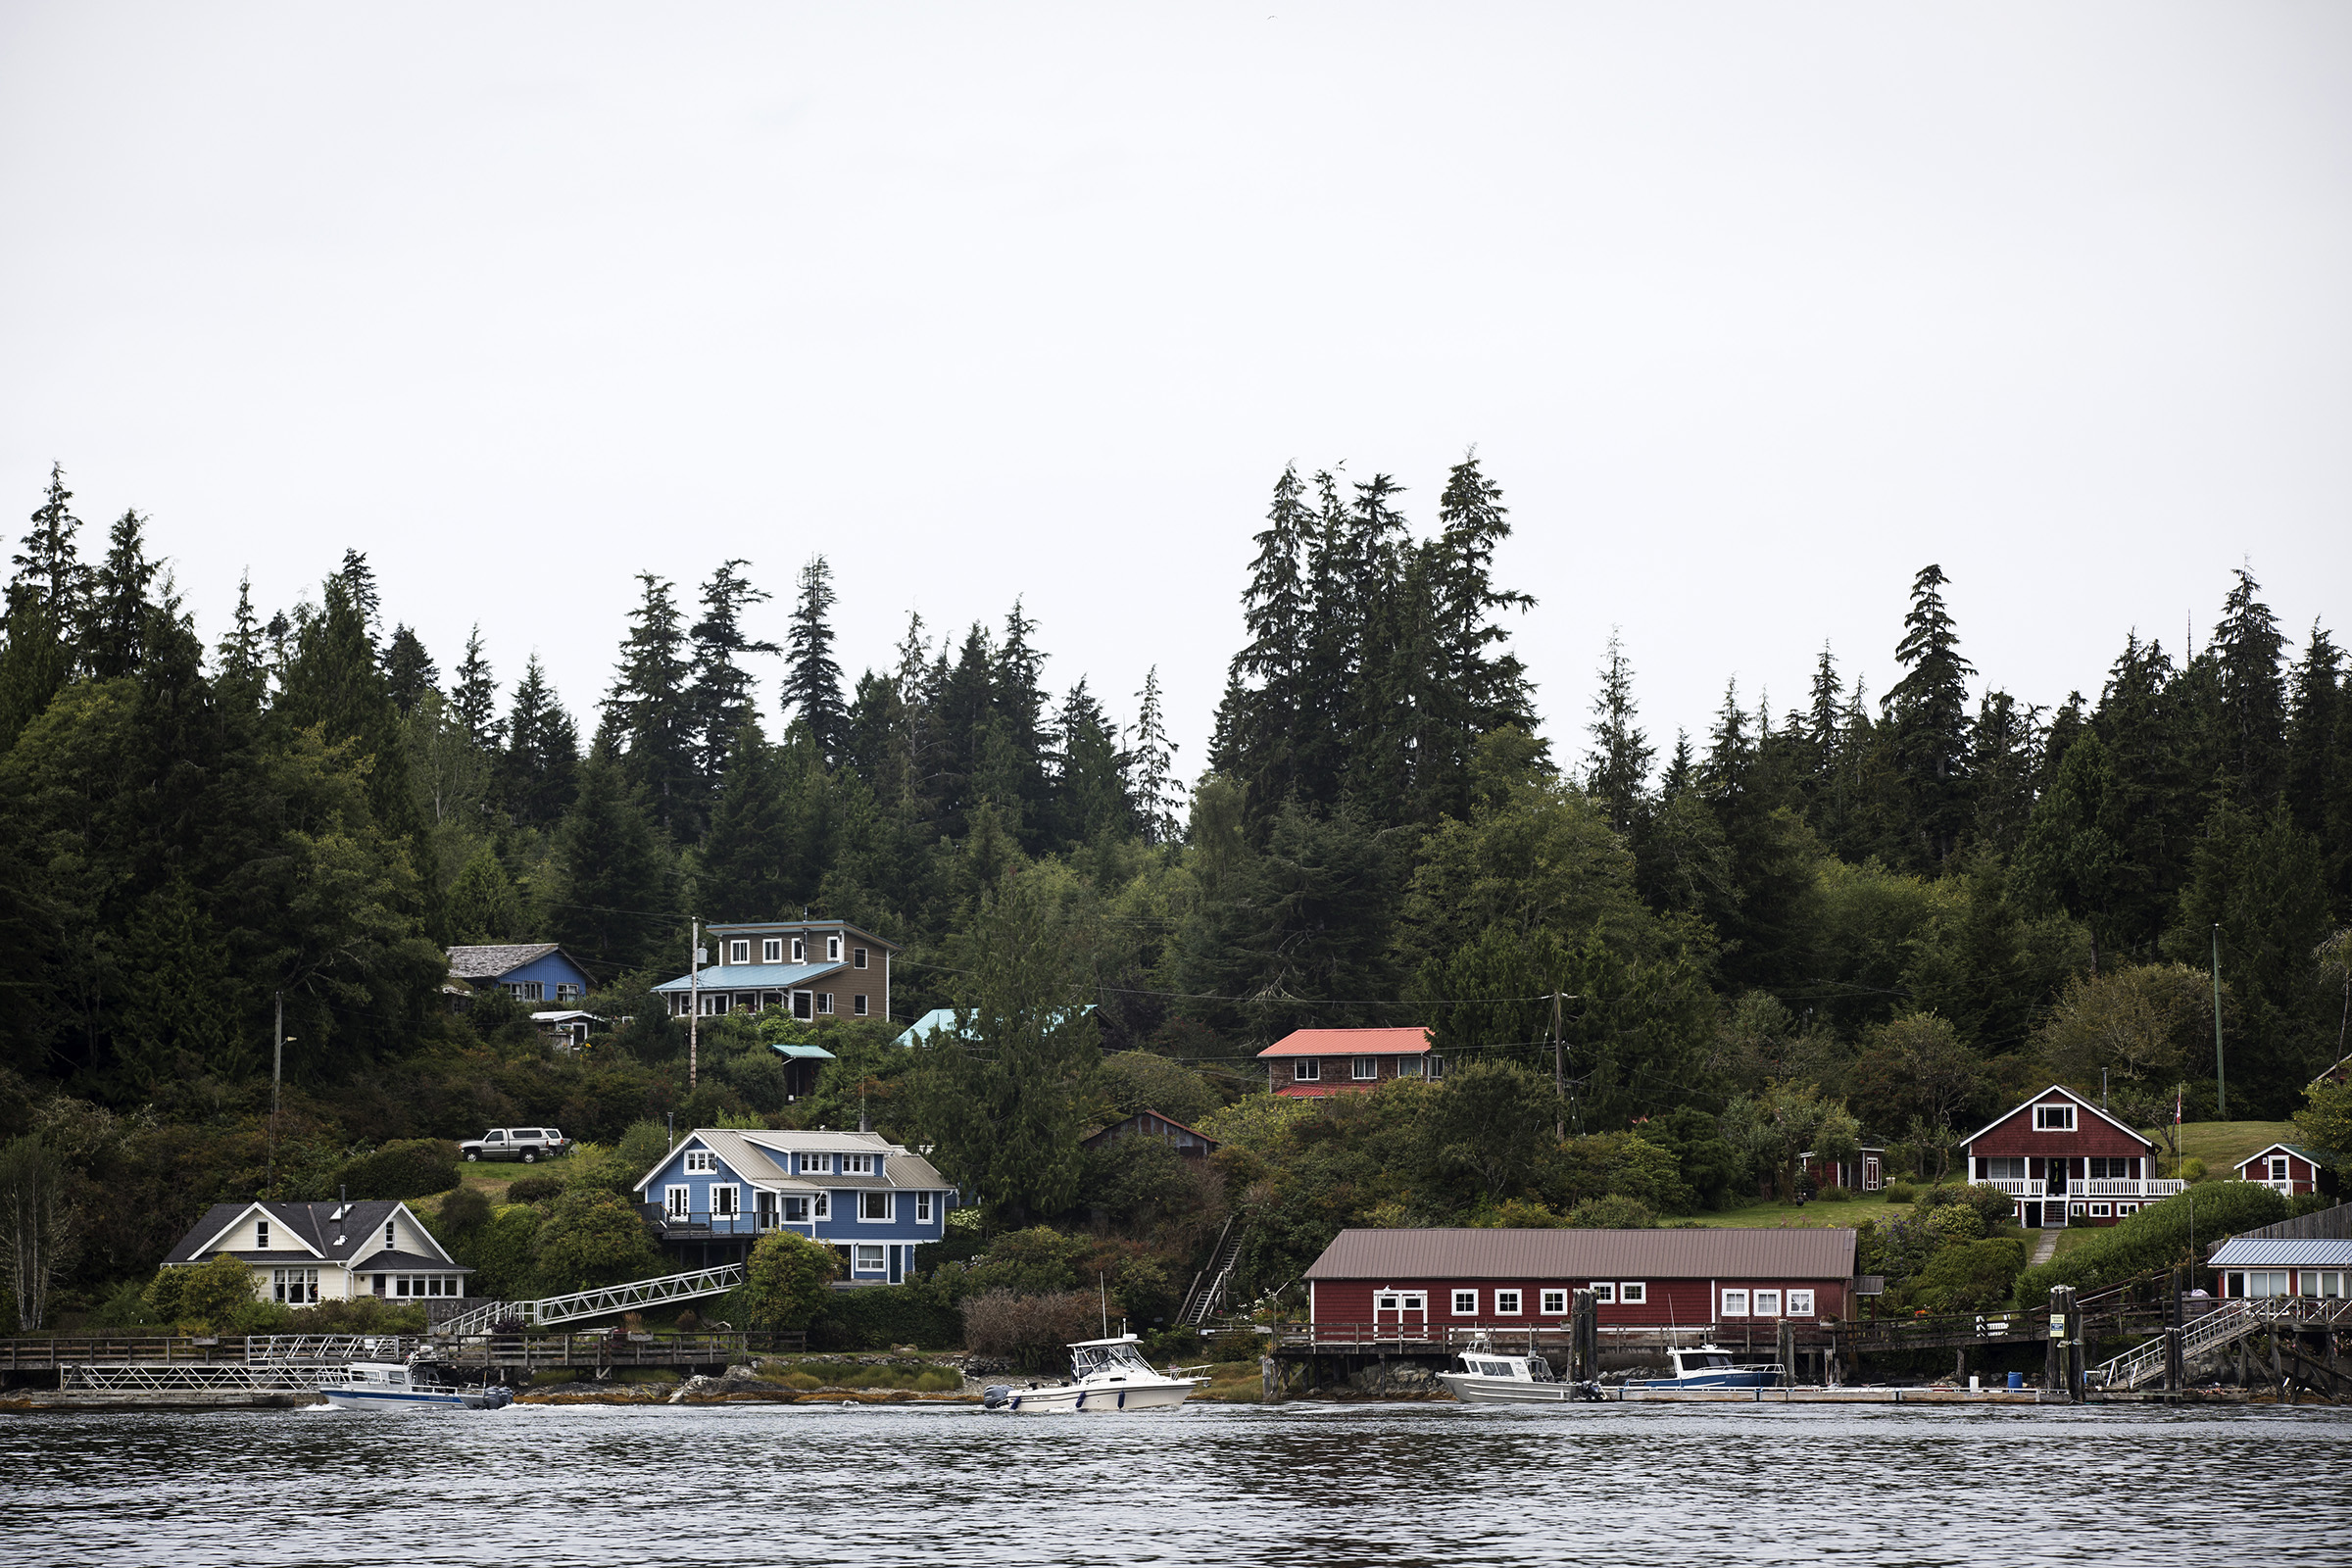 The small town of Bamfield sits on the western edge of the Canadian coast on Vancouver Island. (Melissa Renwick for TIME)